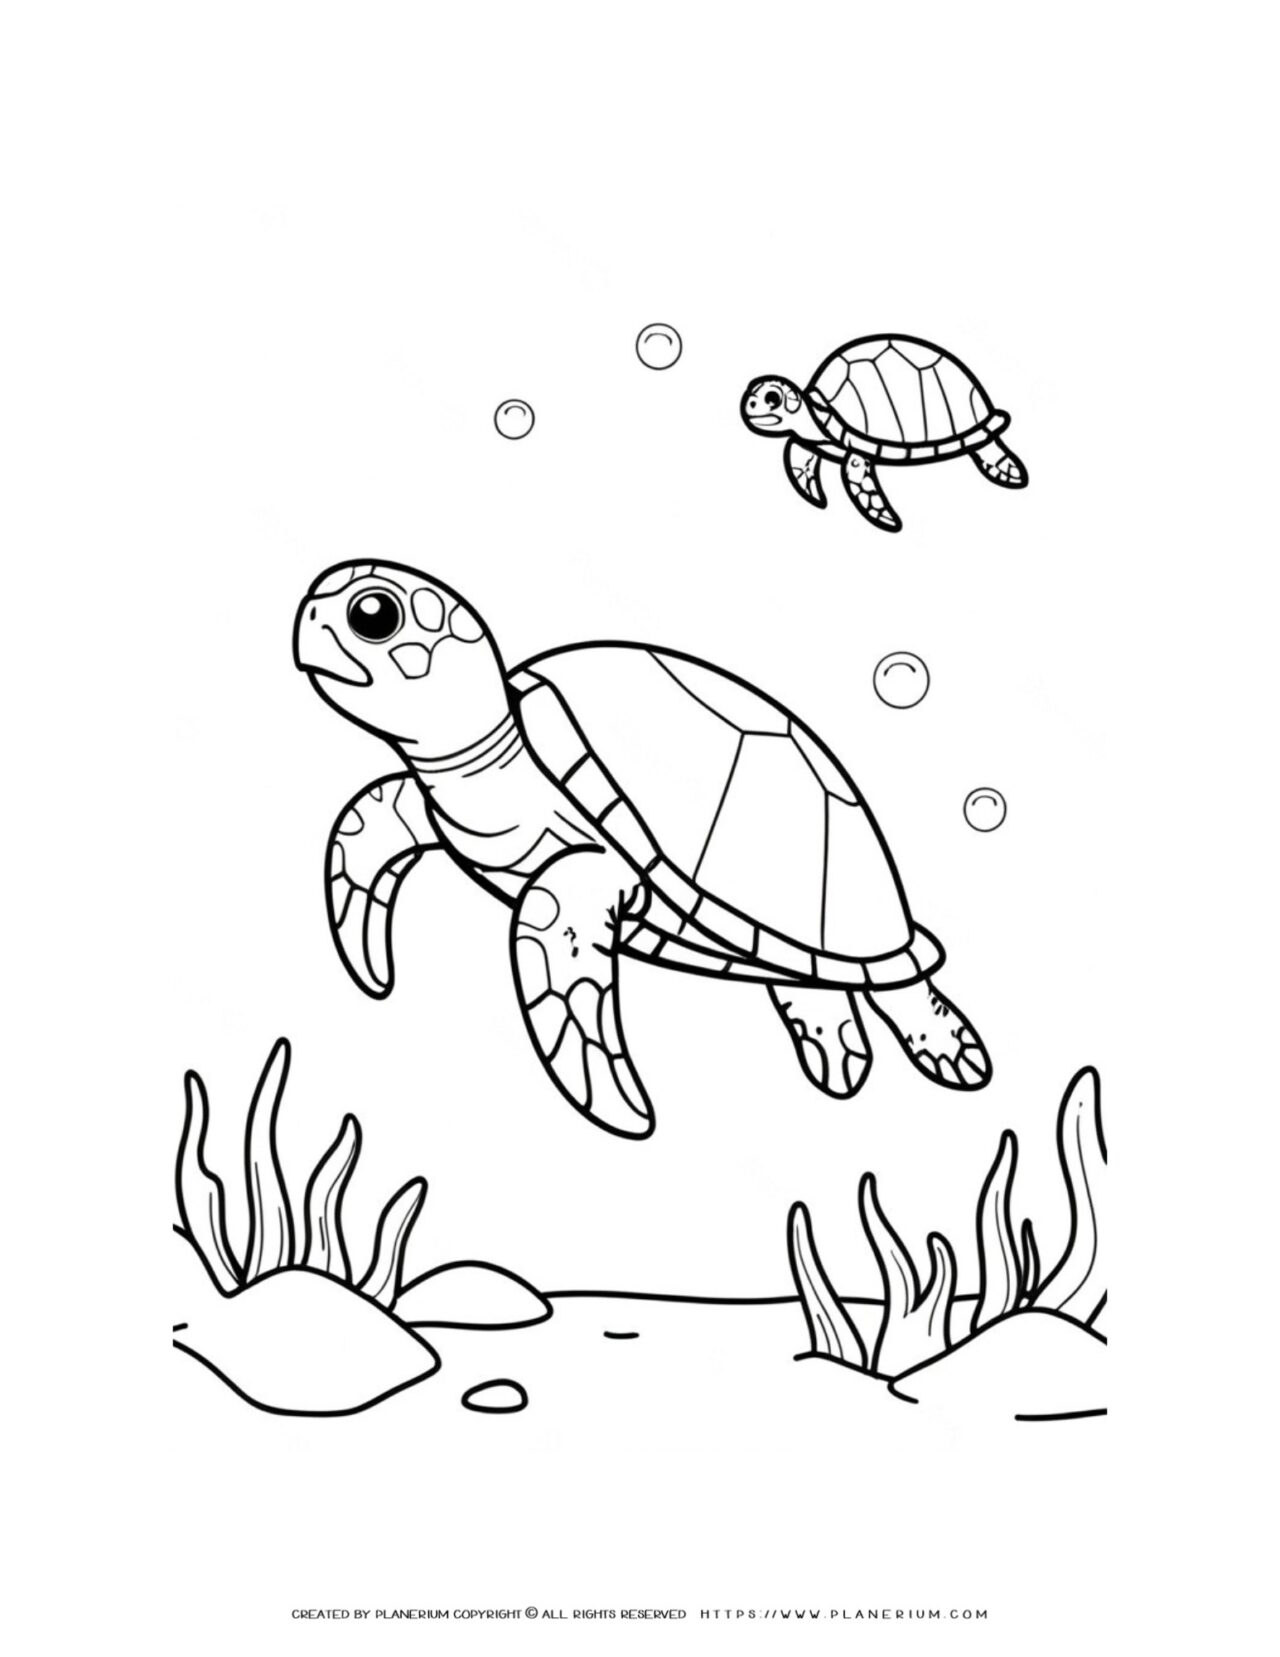 Sea-turtles-coloring-page-for-kids